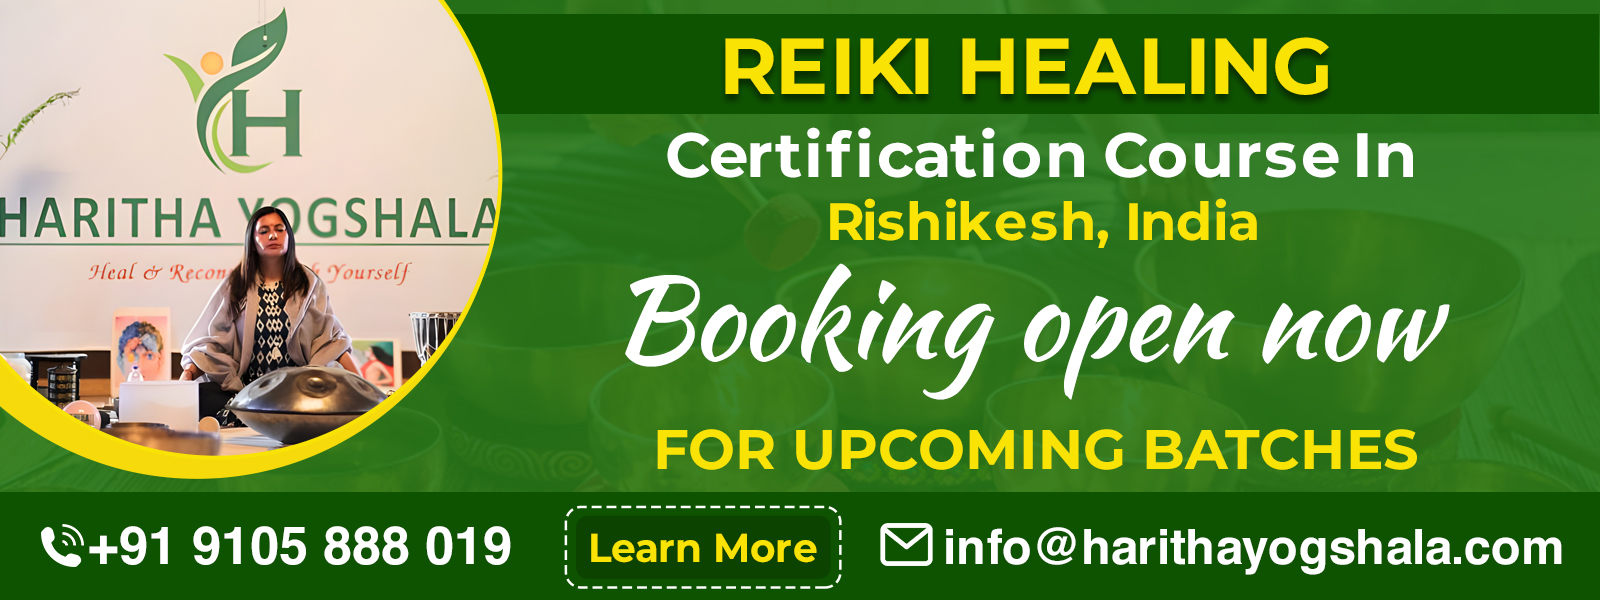 Reiki Healing Certification Course in India 